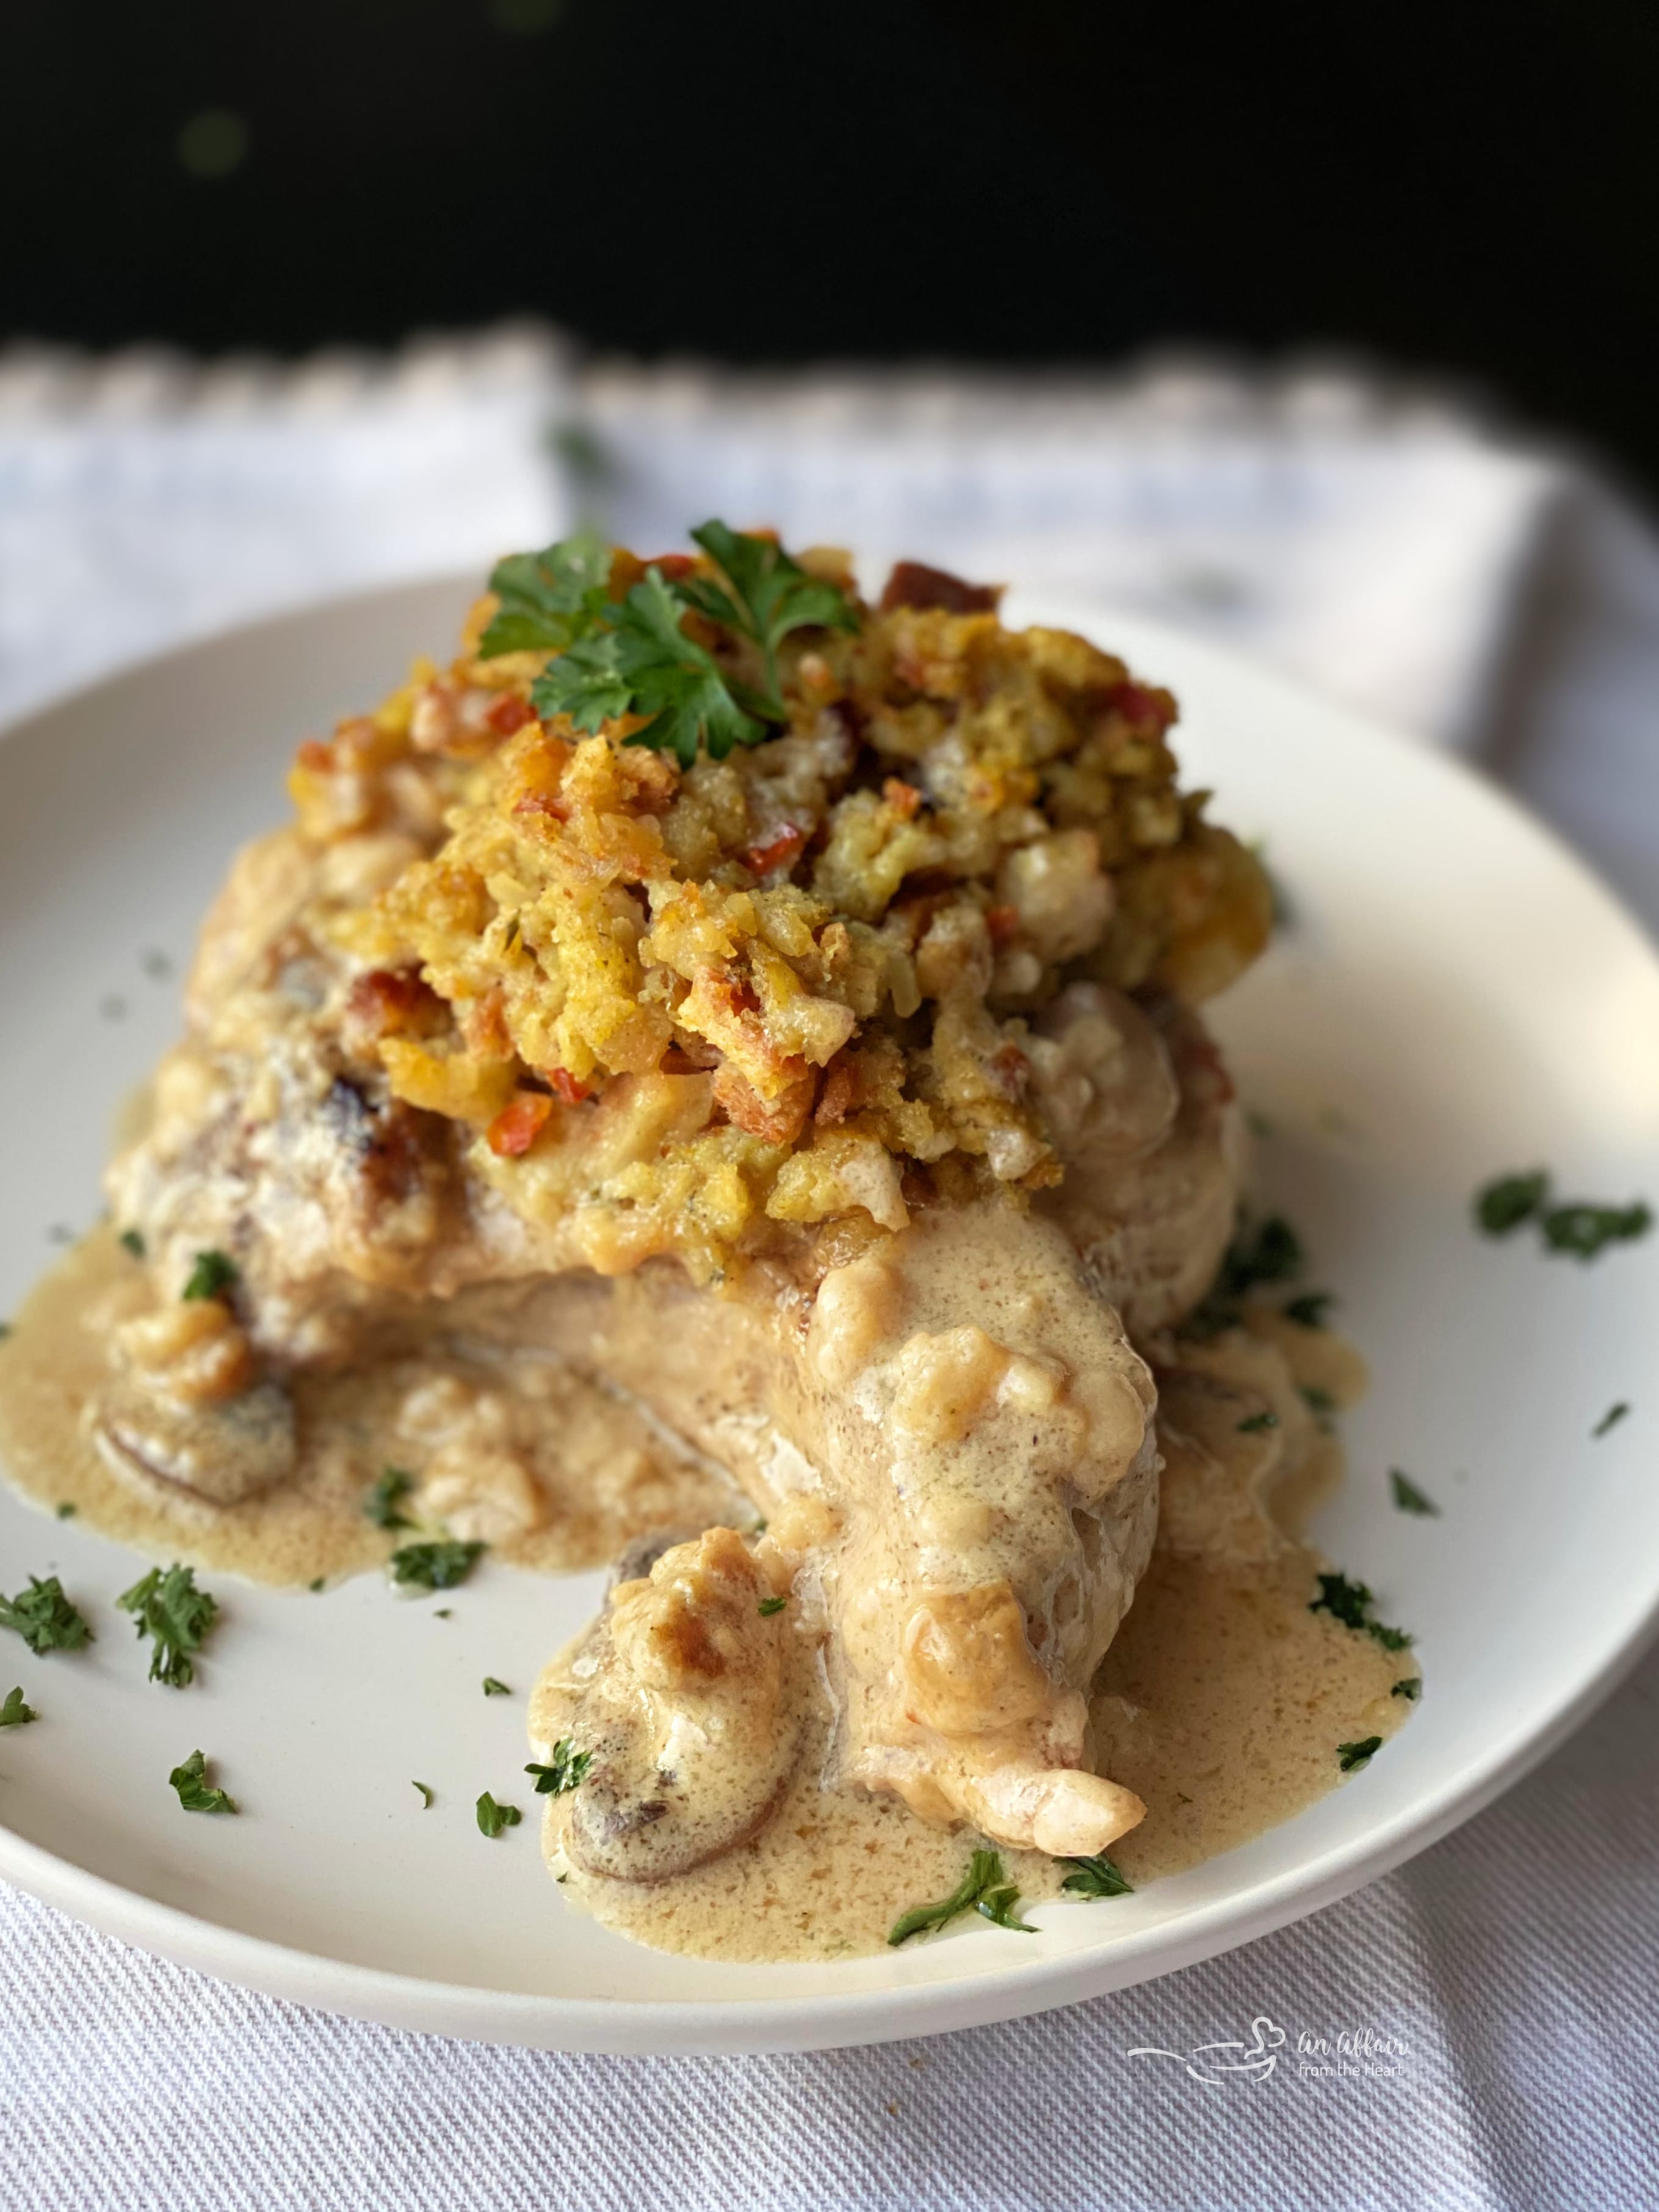 Baked Pork Chops with Stuffing